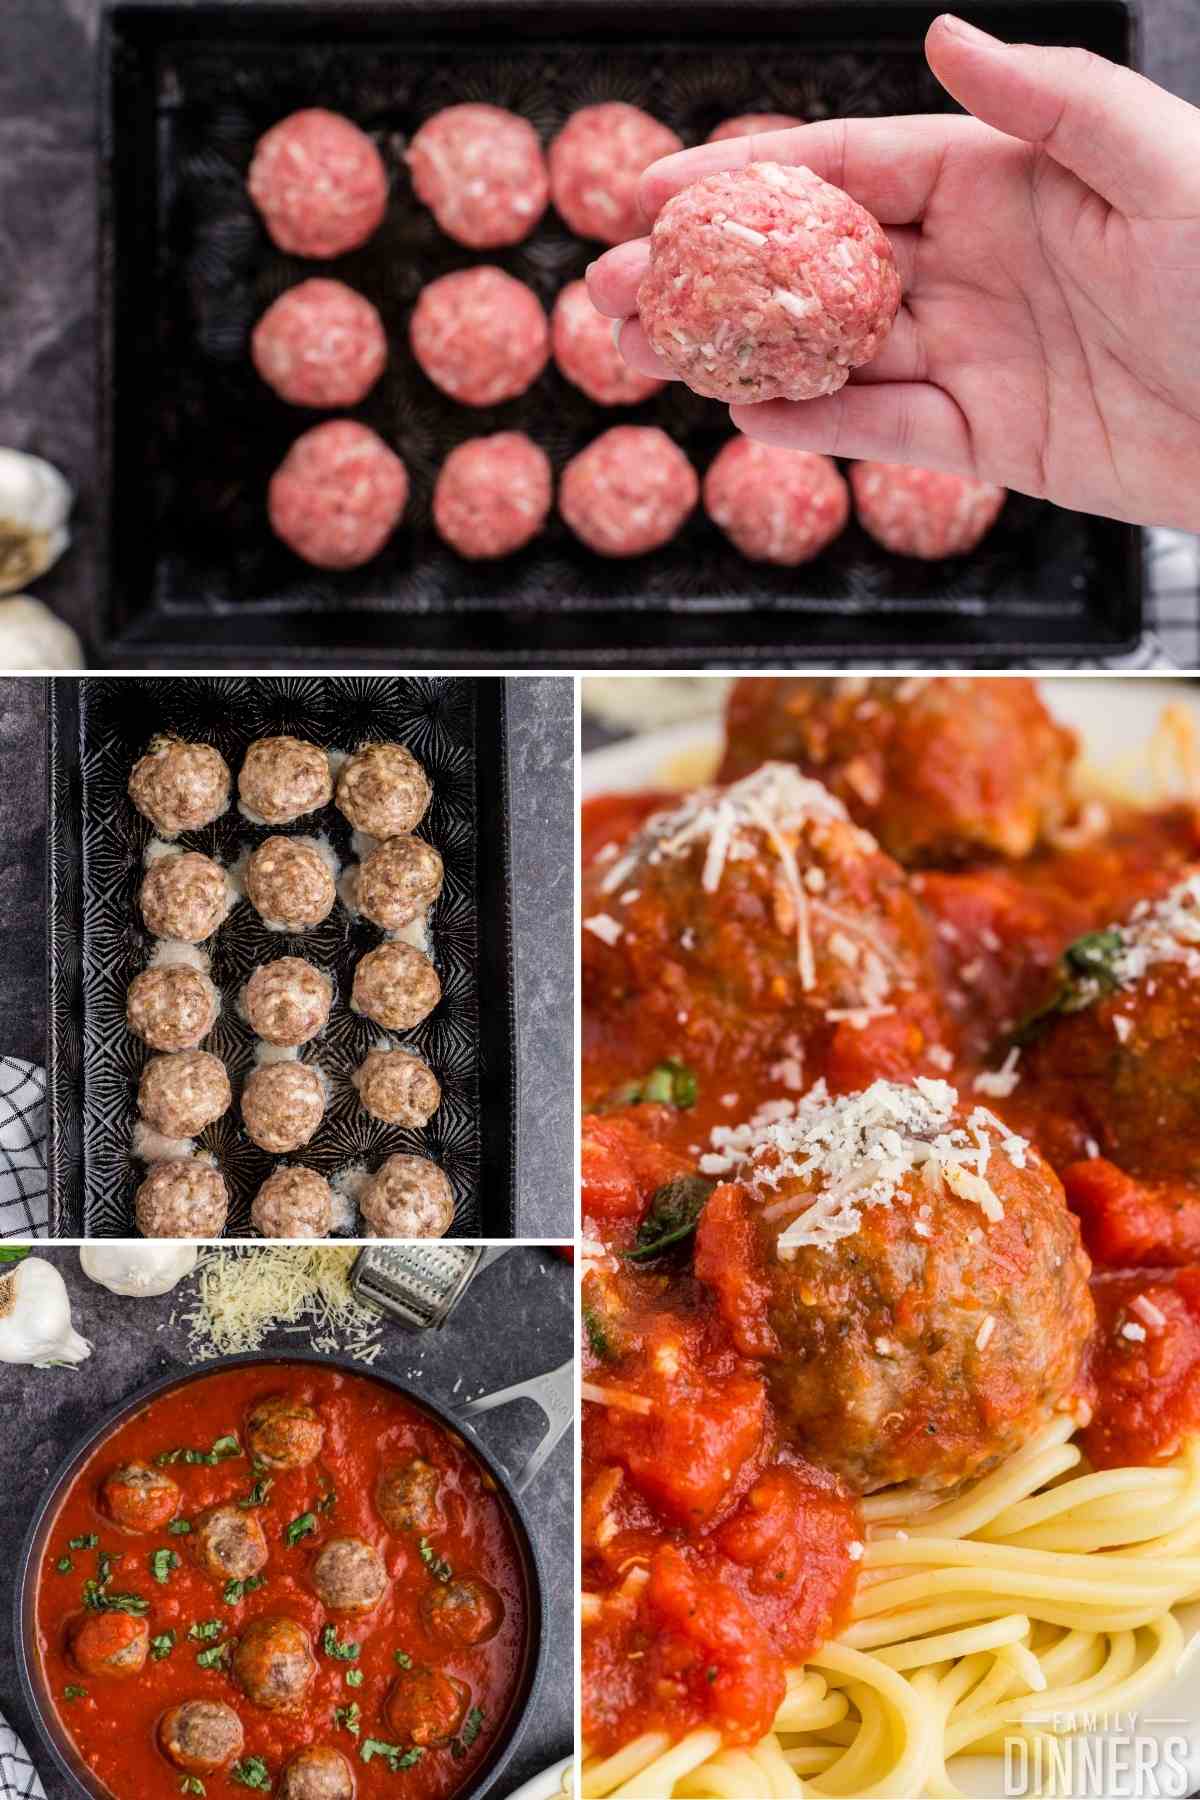 collage - top left image of hand holding large uncooked meatball. Tray of 3 rows of 5 meatballs below the hand. Bottom left image of cooked golden meatballs on baking sheet. Right image of black large pan full of marinara sauce and meatballs with bits of basil.